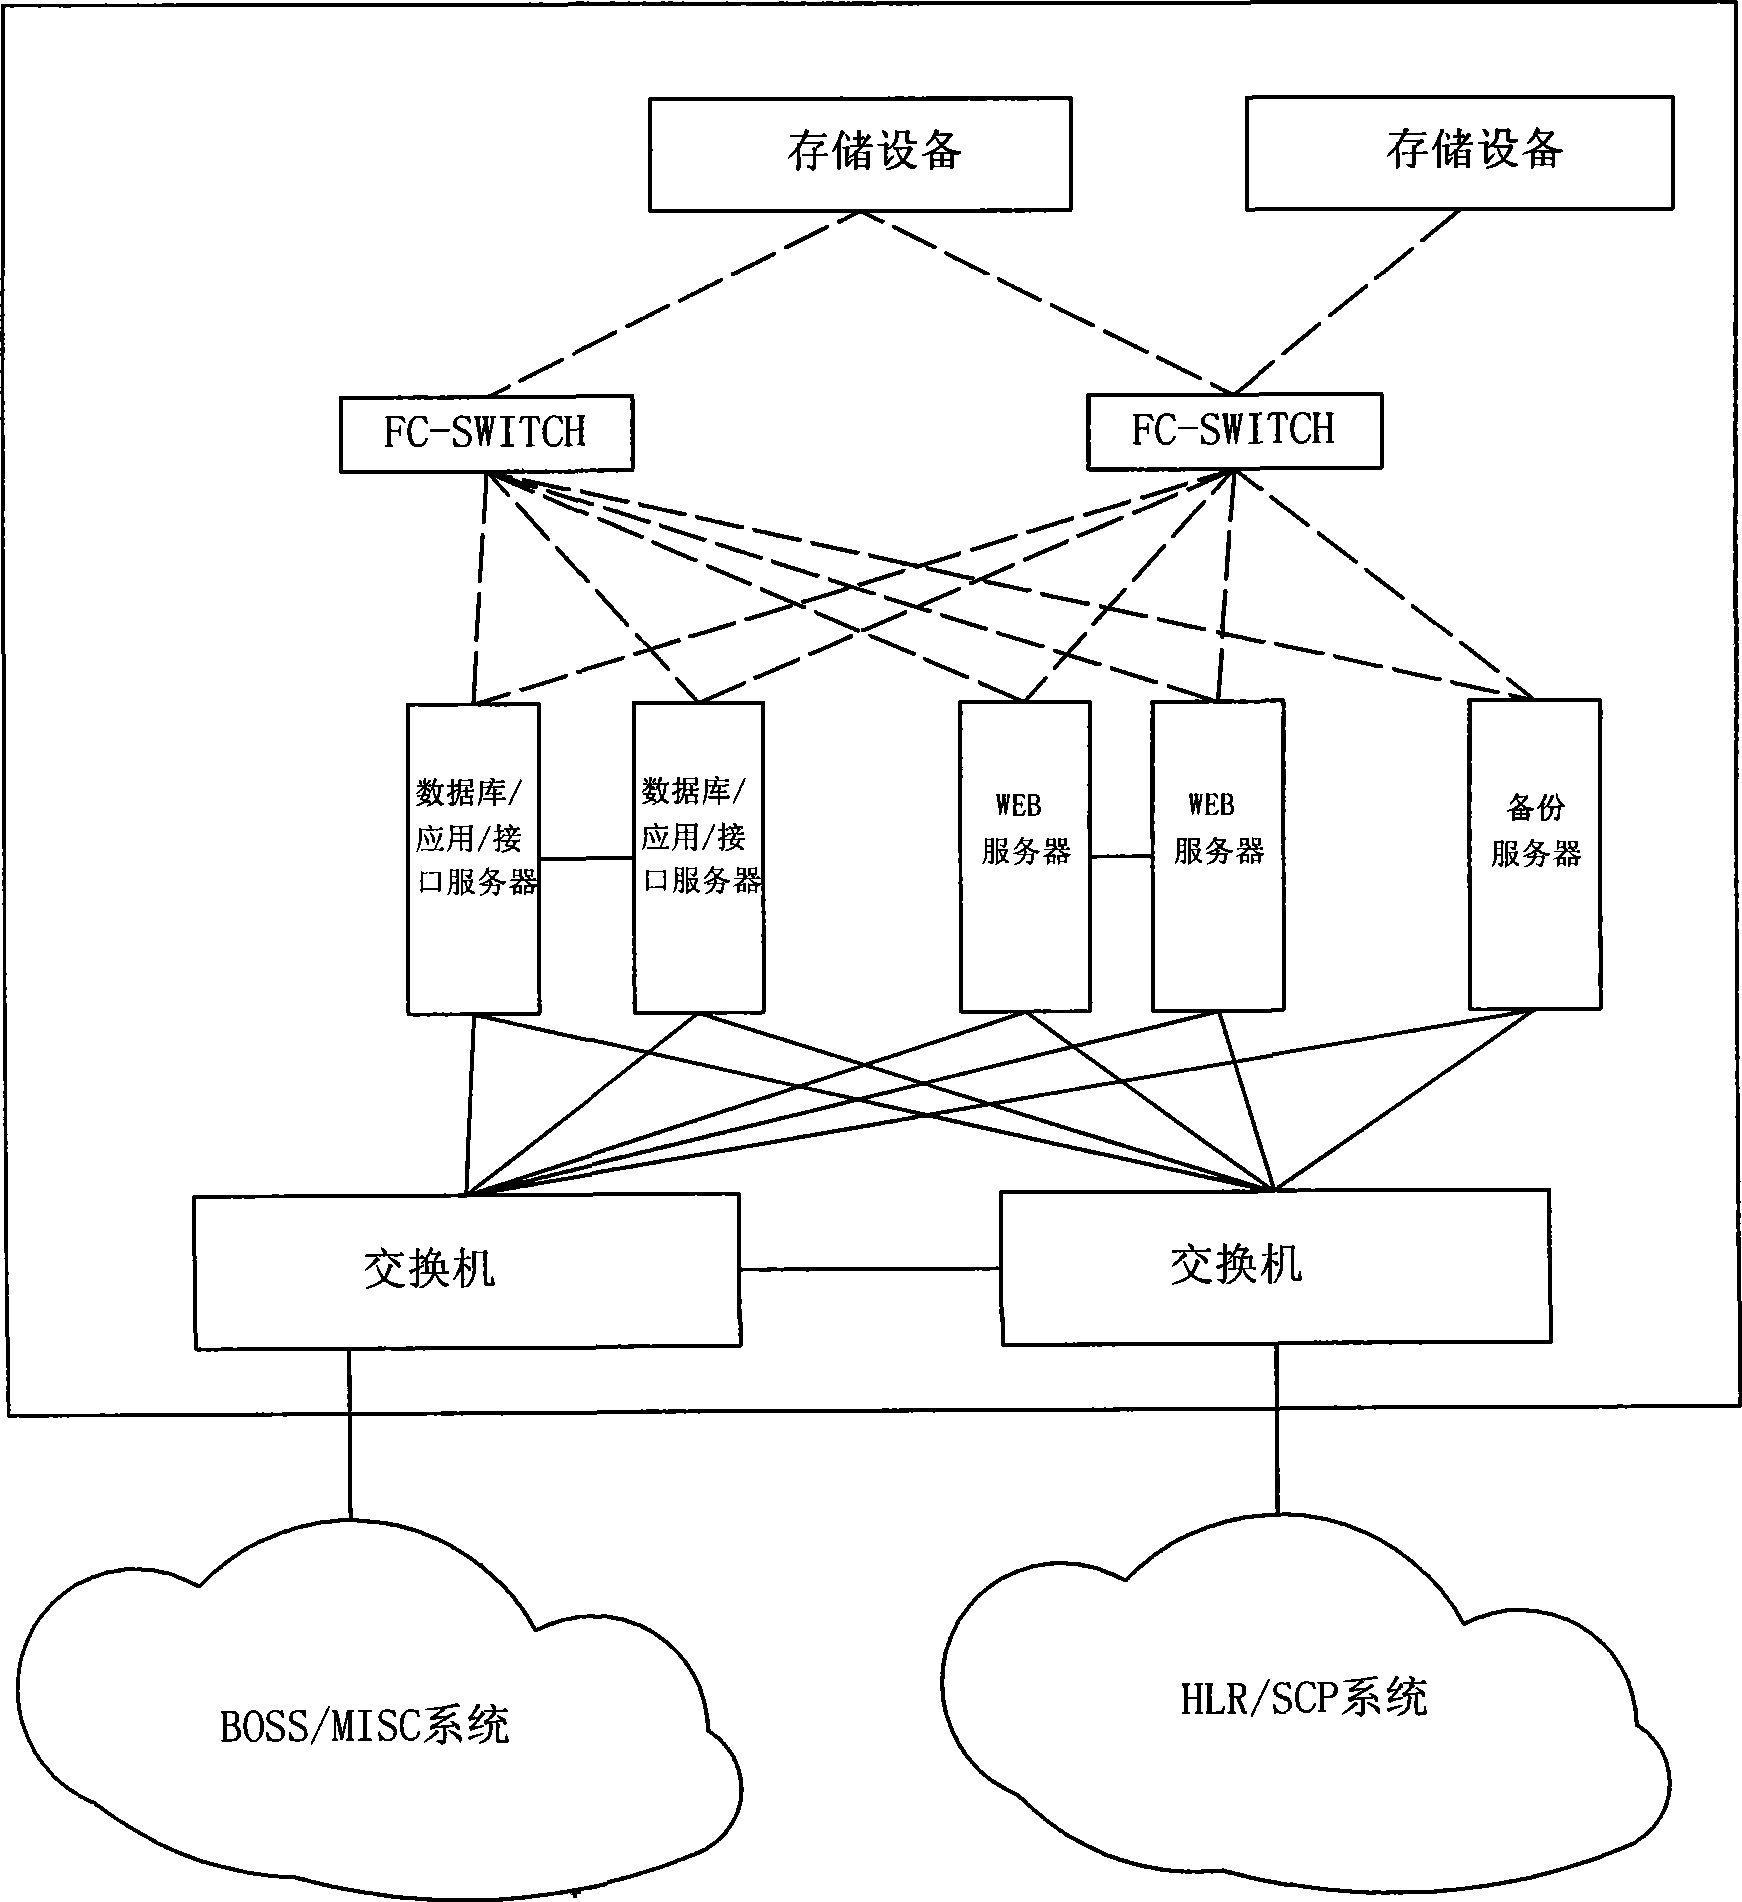 System and method for synchronizing comparison of data consistency